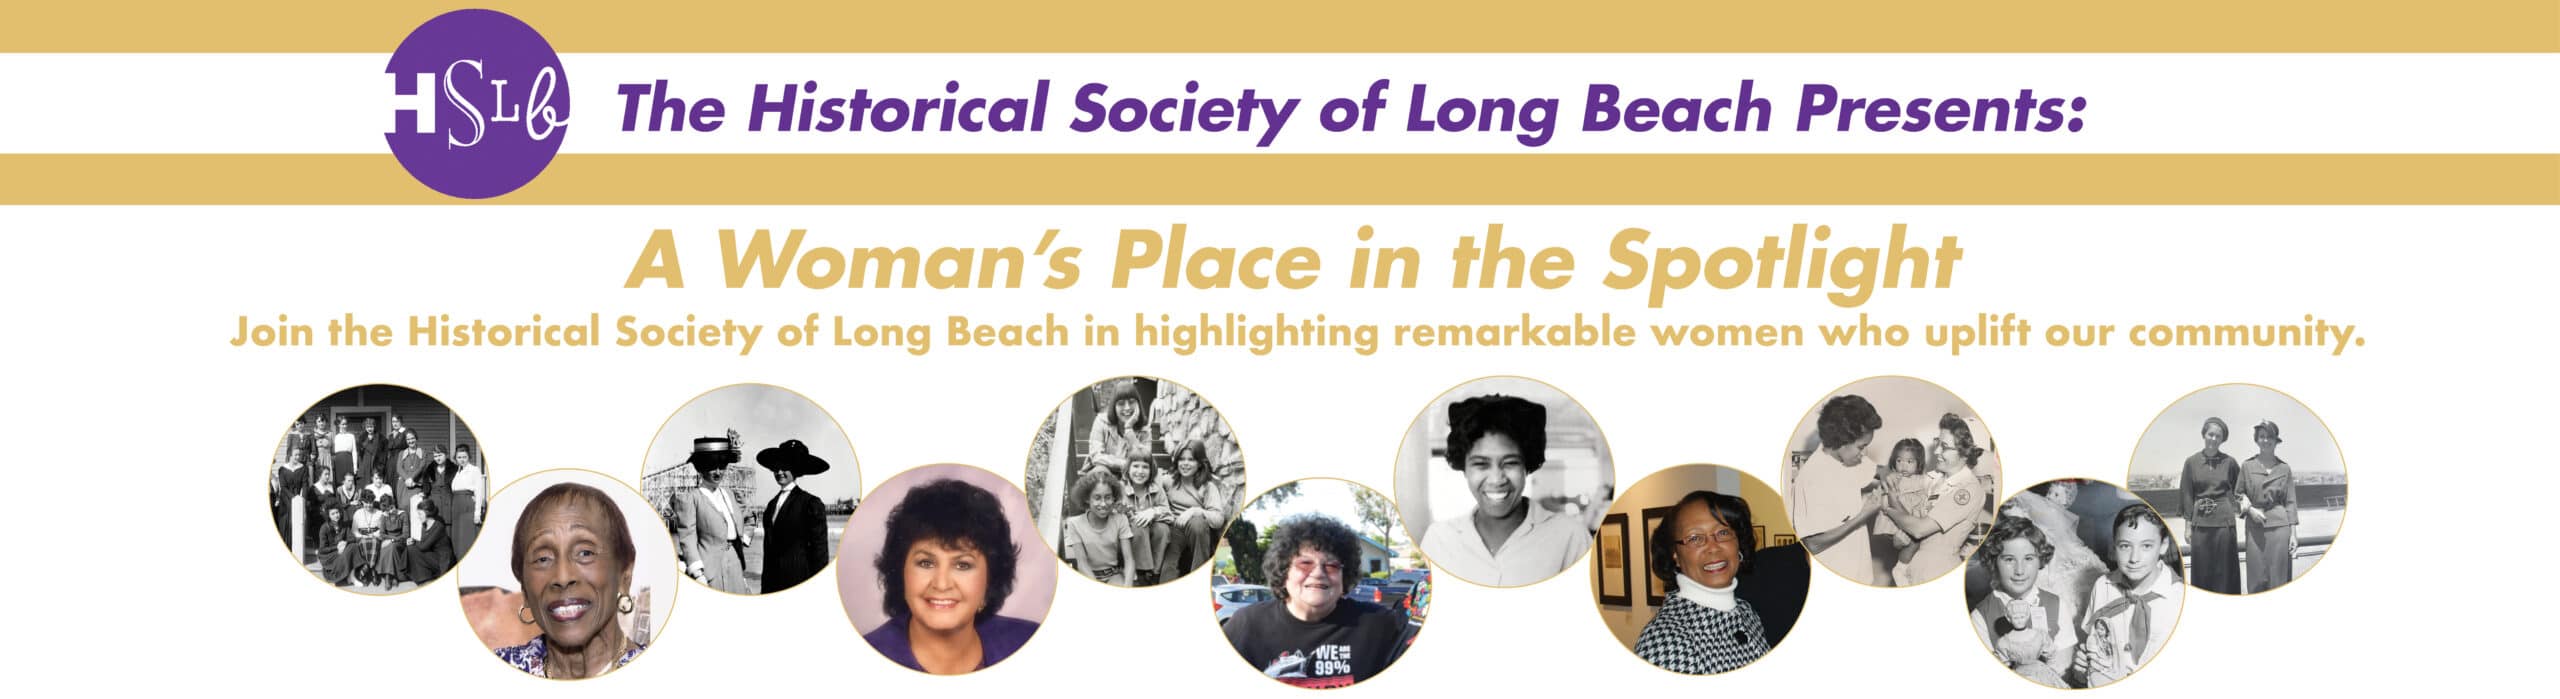 HSLB the historical society of long beach presents a woman's place in the spotlight